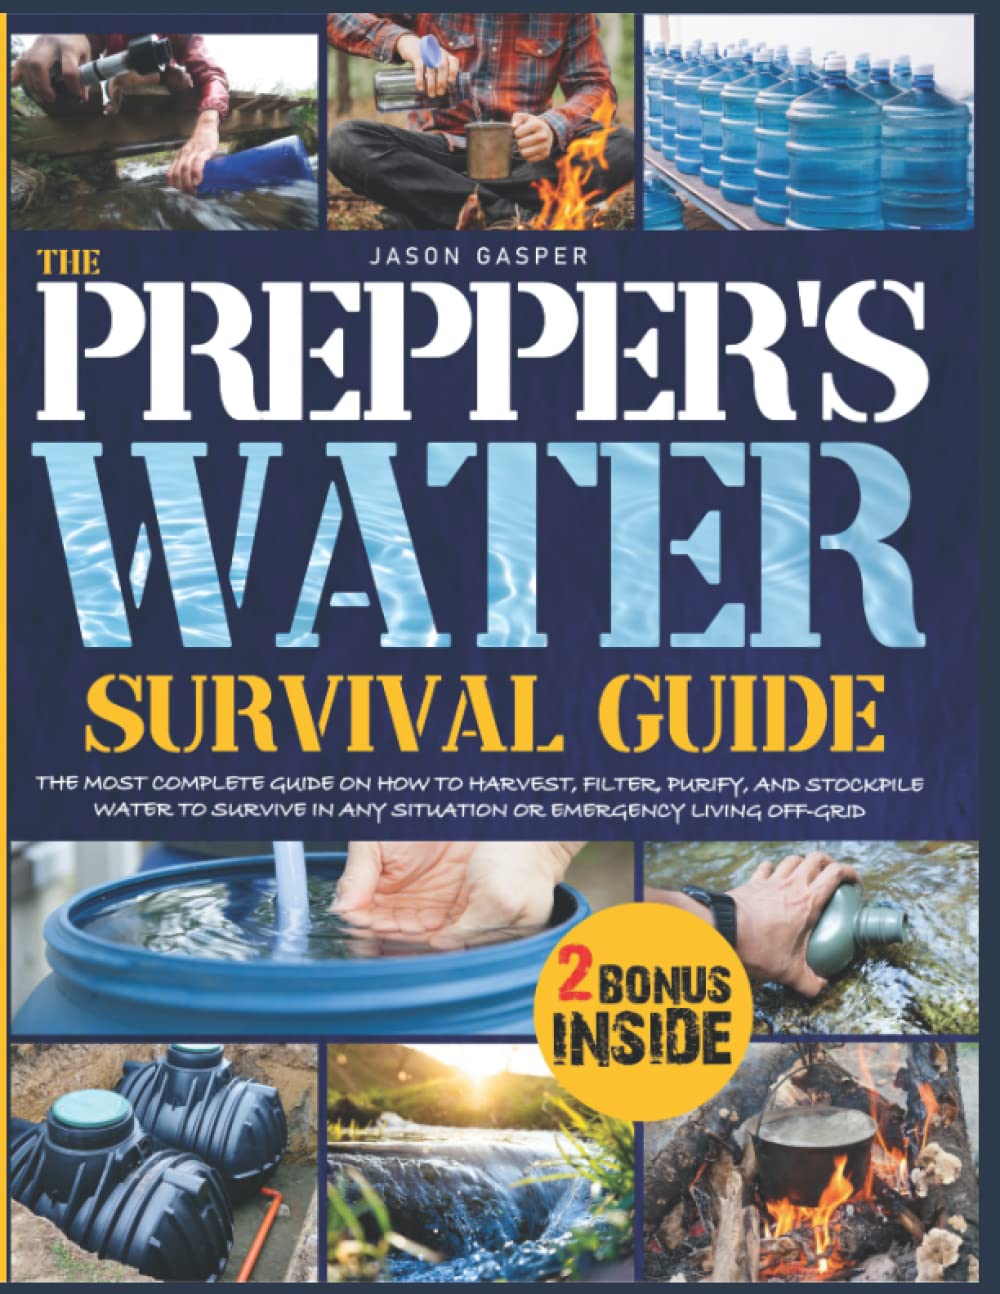 The Prepper’s Water Survival Guide: The Most Complete Guide on How To Harvest, Filter, Purify, and Stockpile Water to Survive In any Situation or Emergency Living Off-Grid.